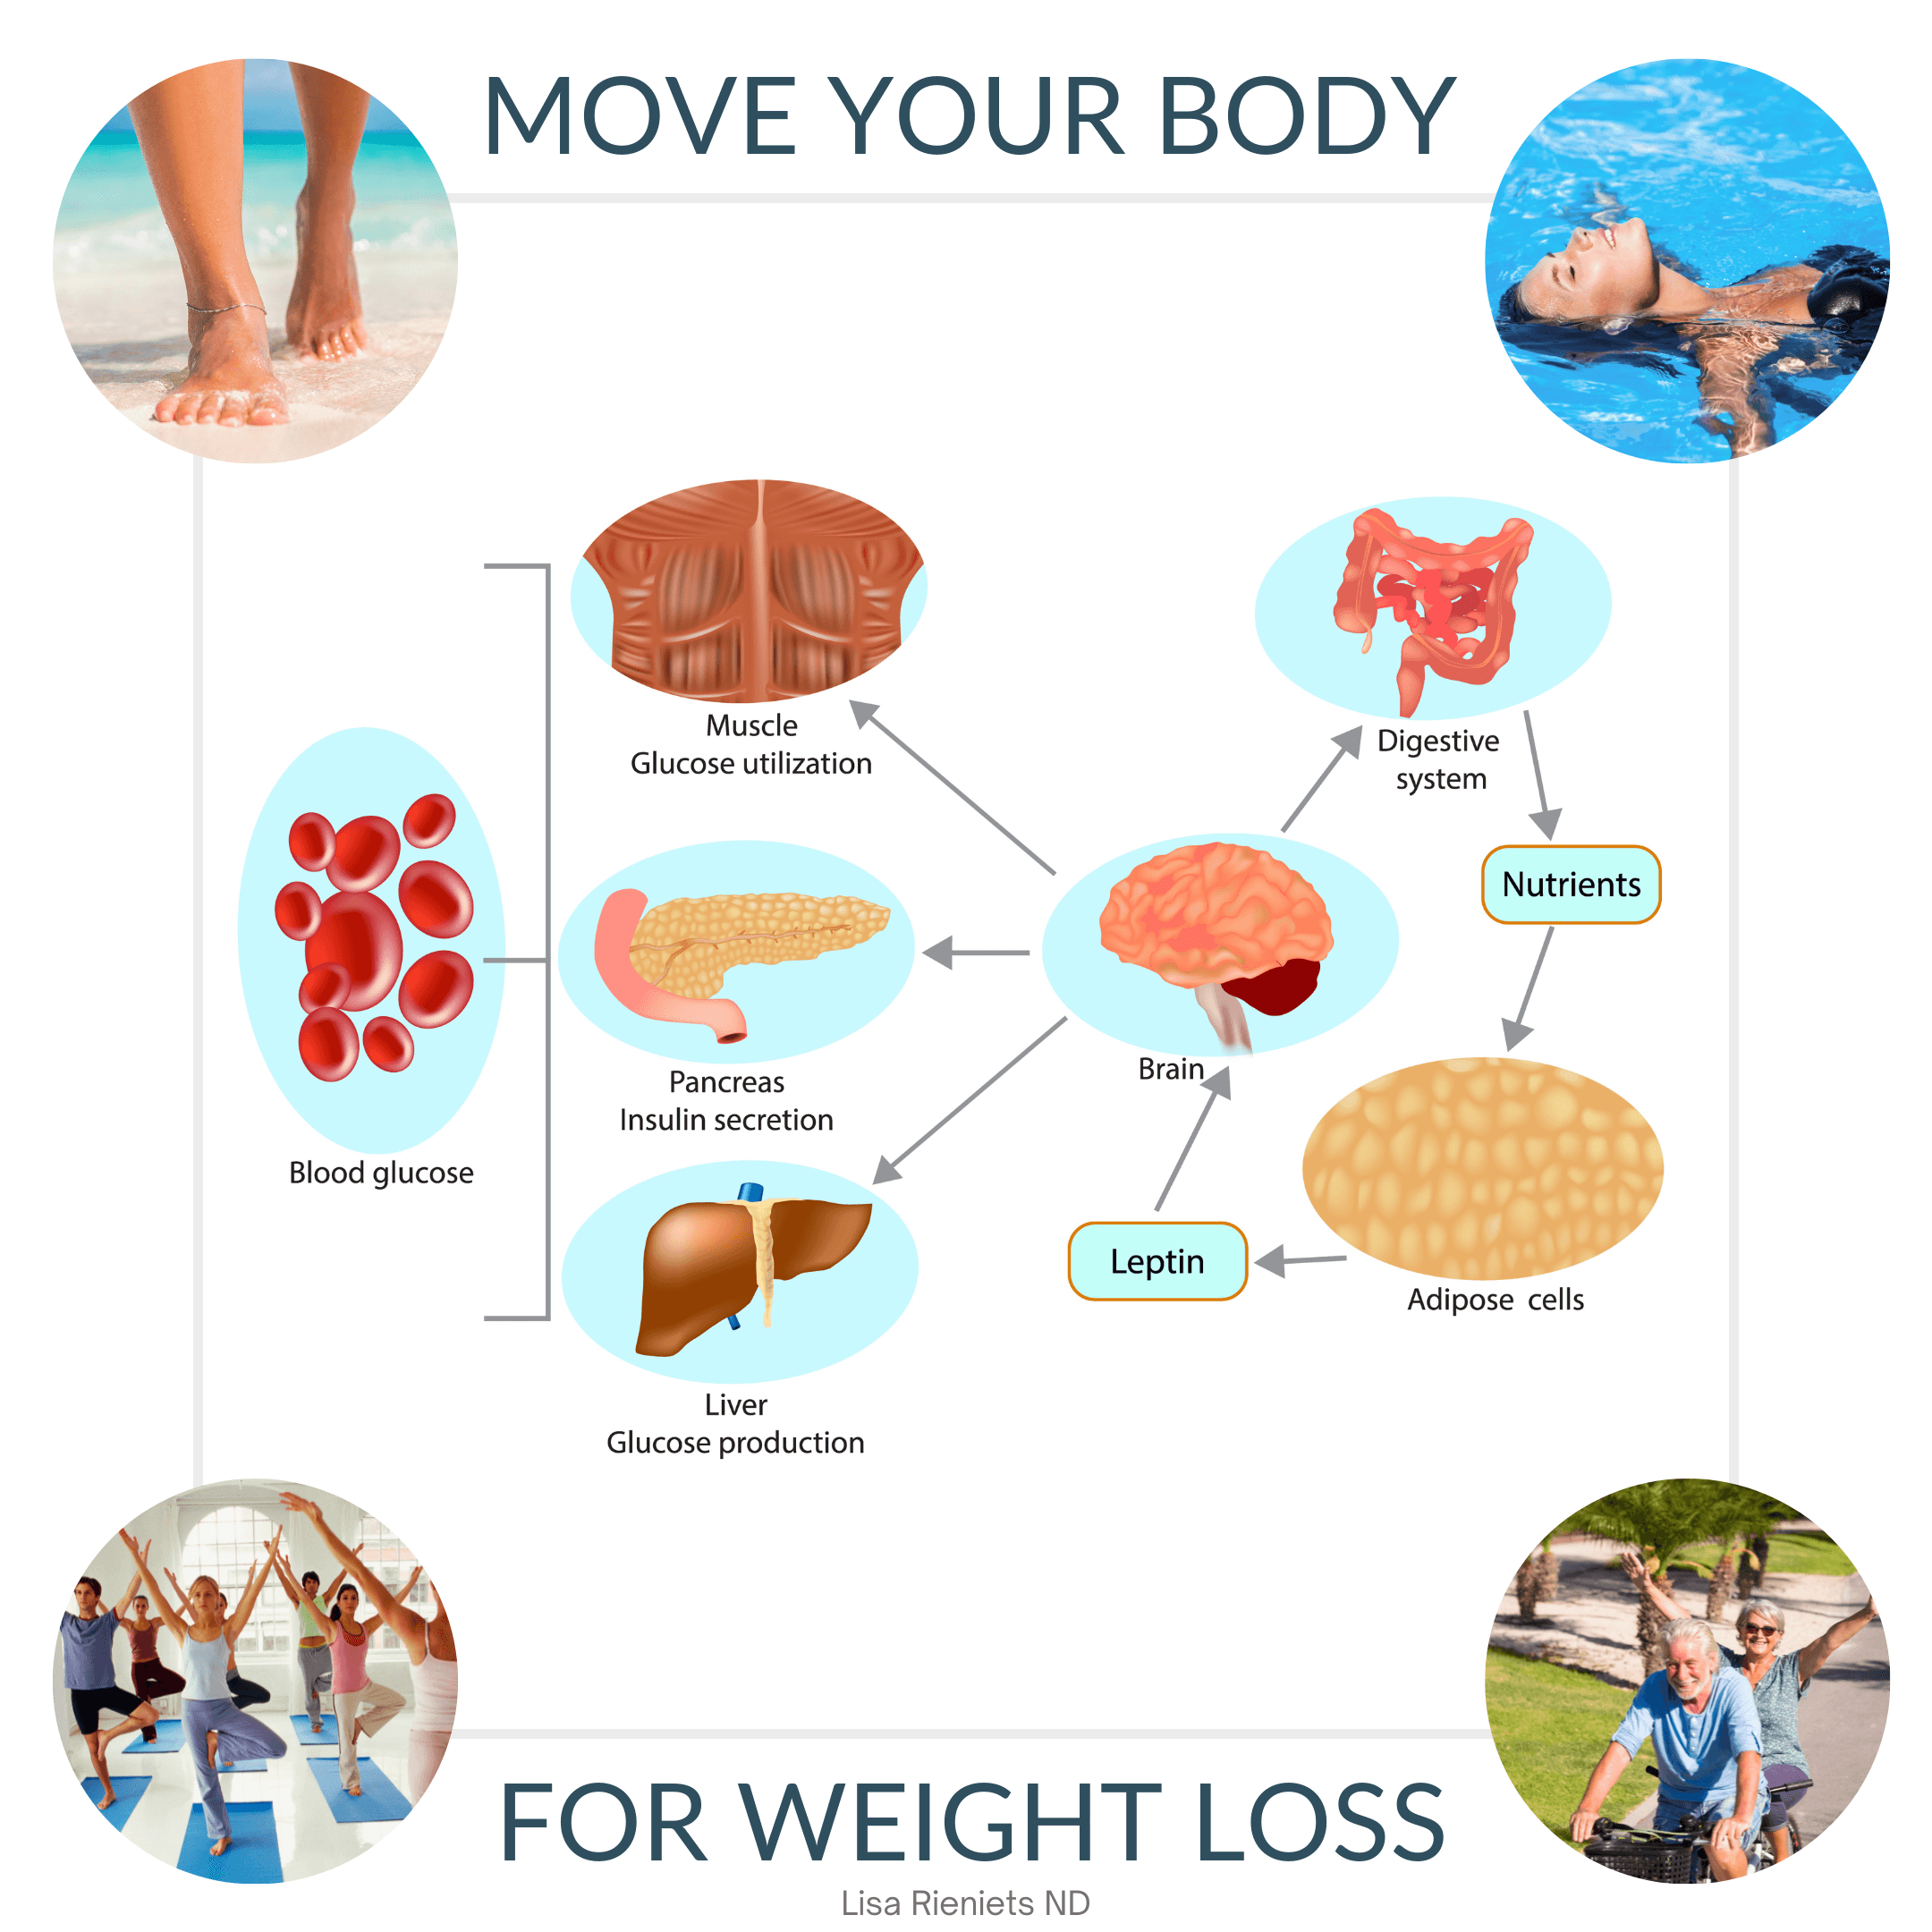 Exercise is essential in any weight loss program. Many of our organ functions, including metabolism, rely on movement for optimum performance.